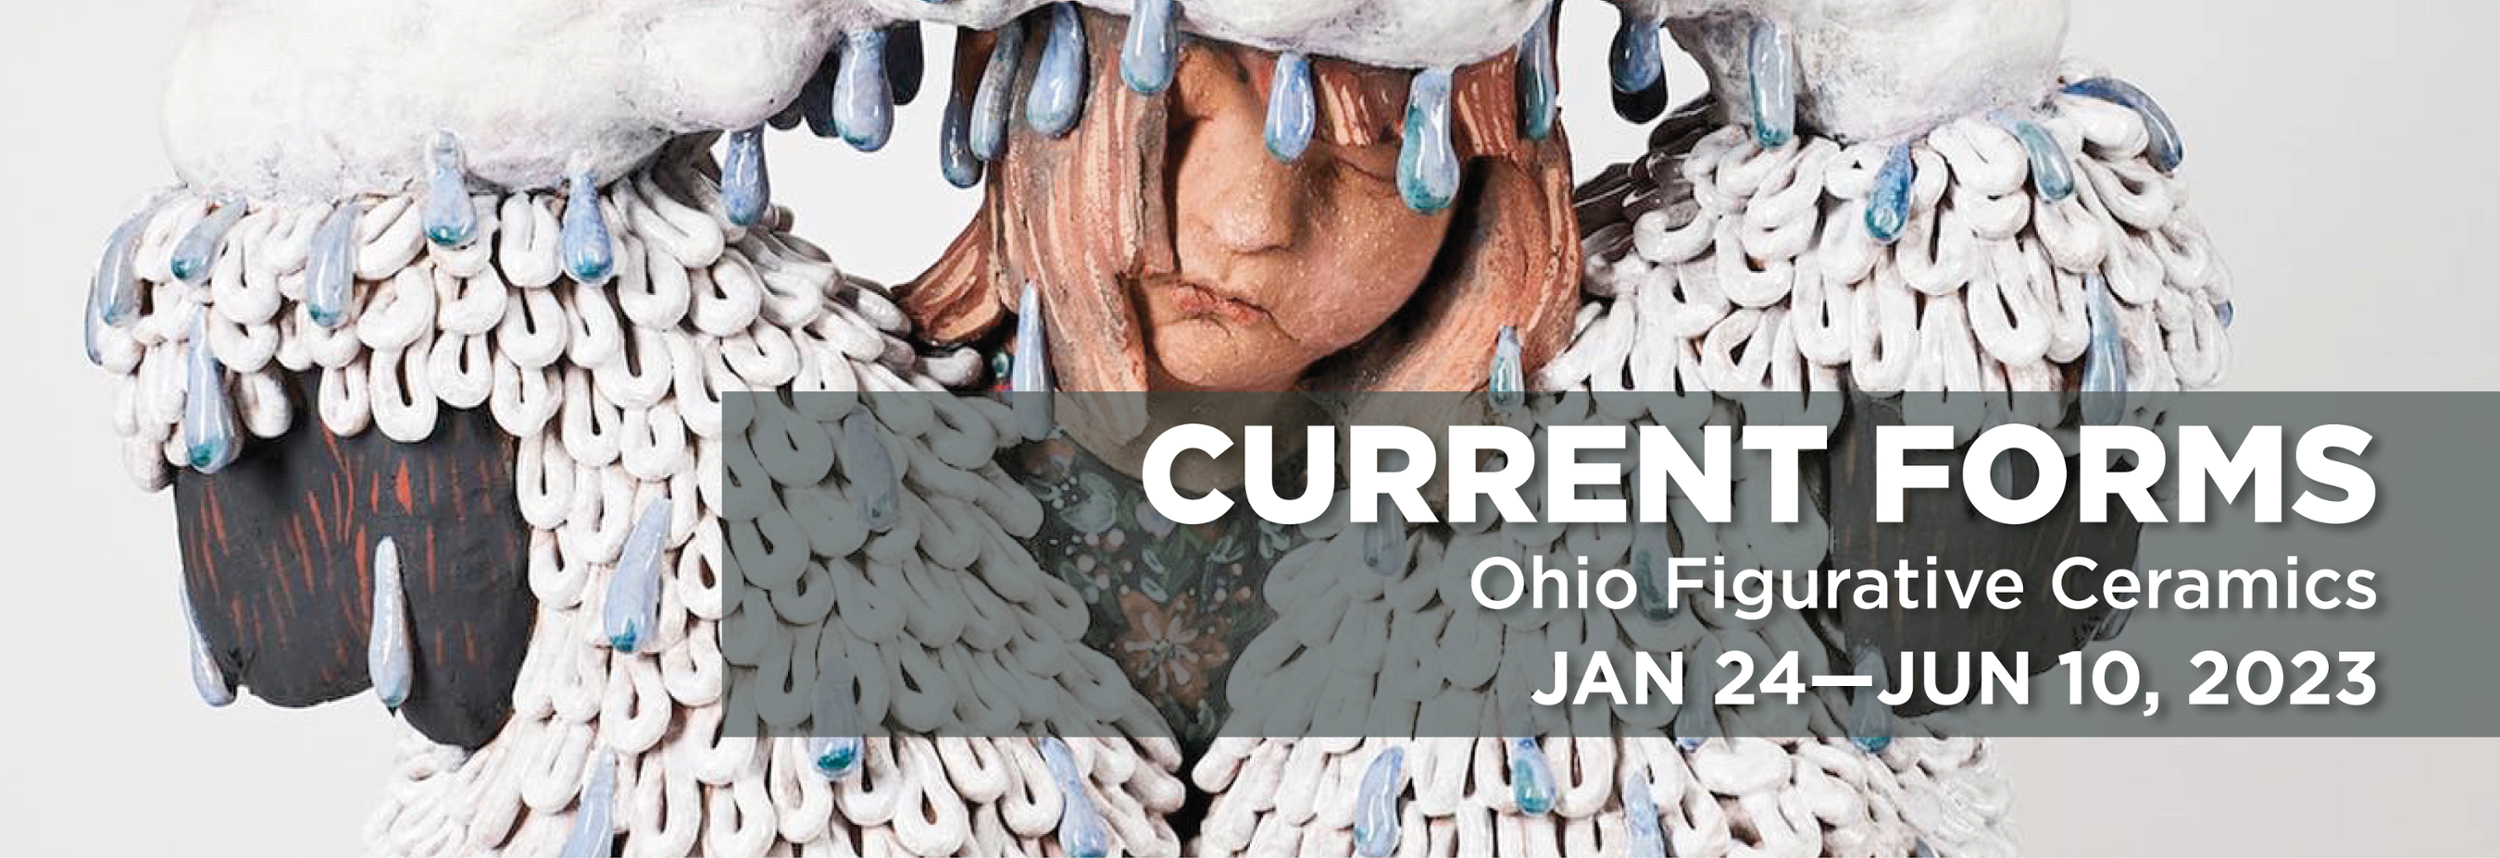 Poster image for the exhibition Current Forms: Ohio Figurative Ceramics on display January 24, 2023 to June 10, 2023